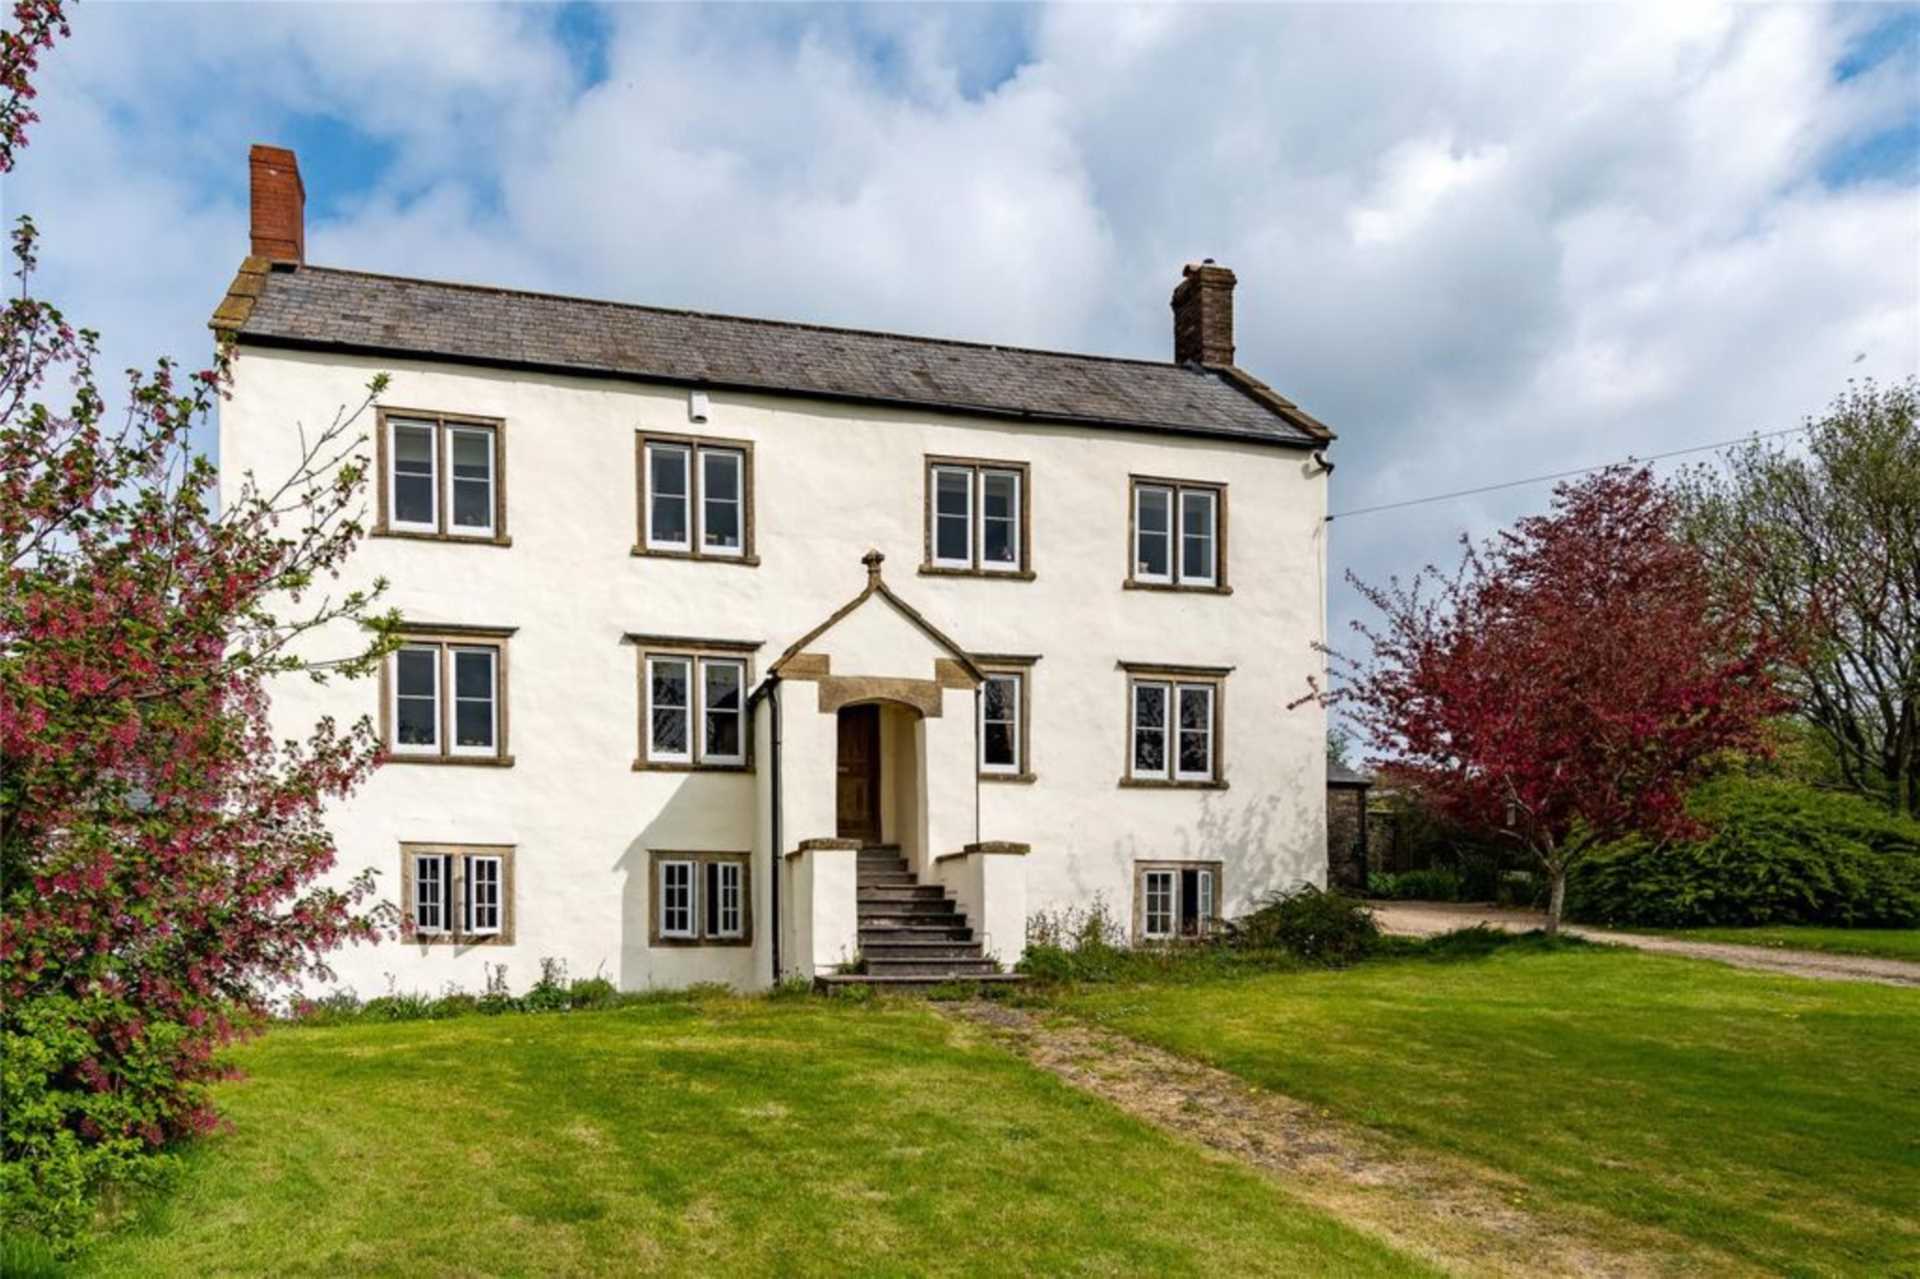 6 bed Country House for rent in Shepton Mallet. From Swallows Property Letting - Frome